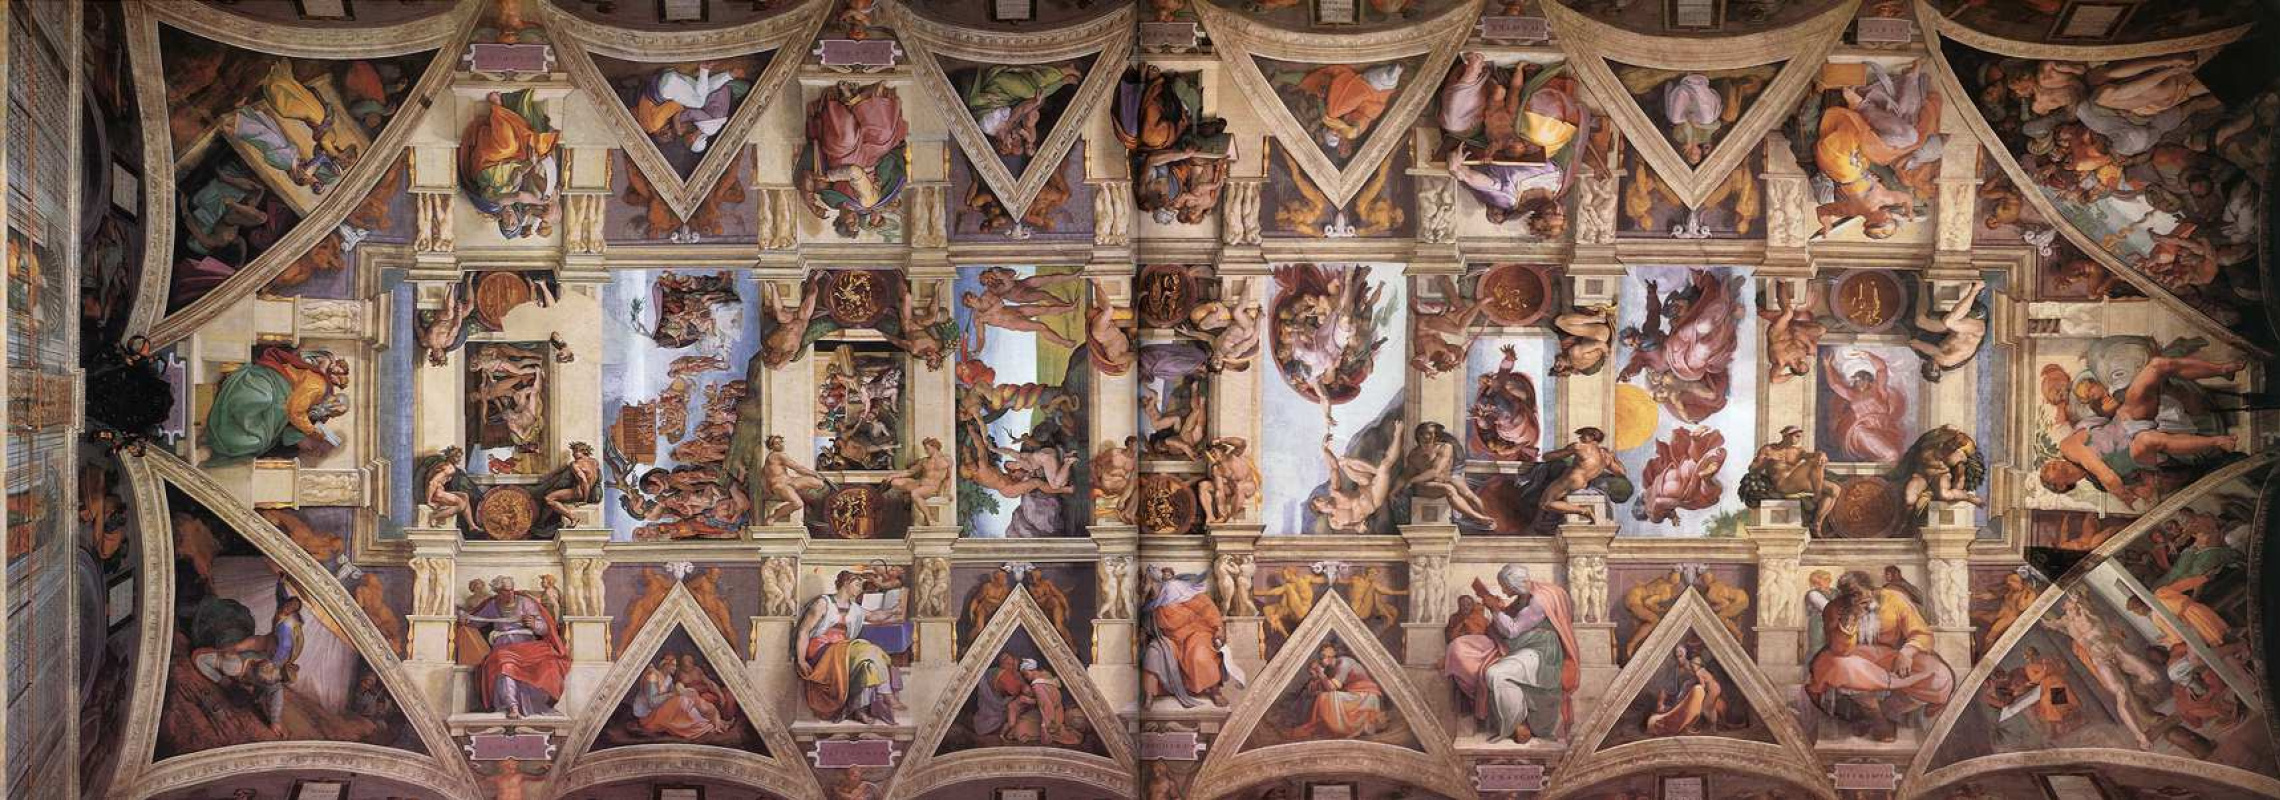 The Ceiling Of The Sistine Chapel By Michelangelo Buonarroti